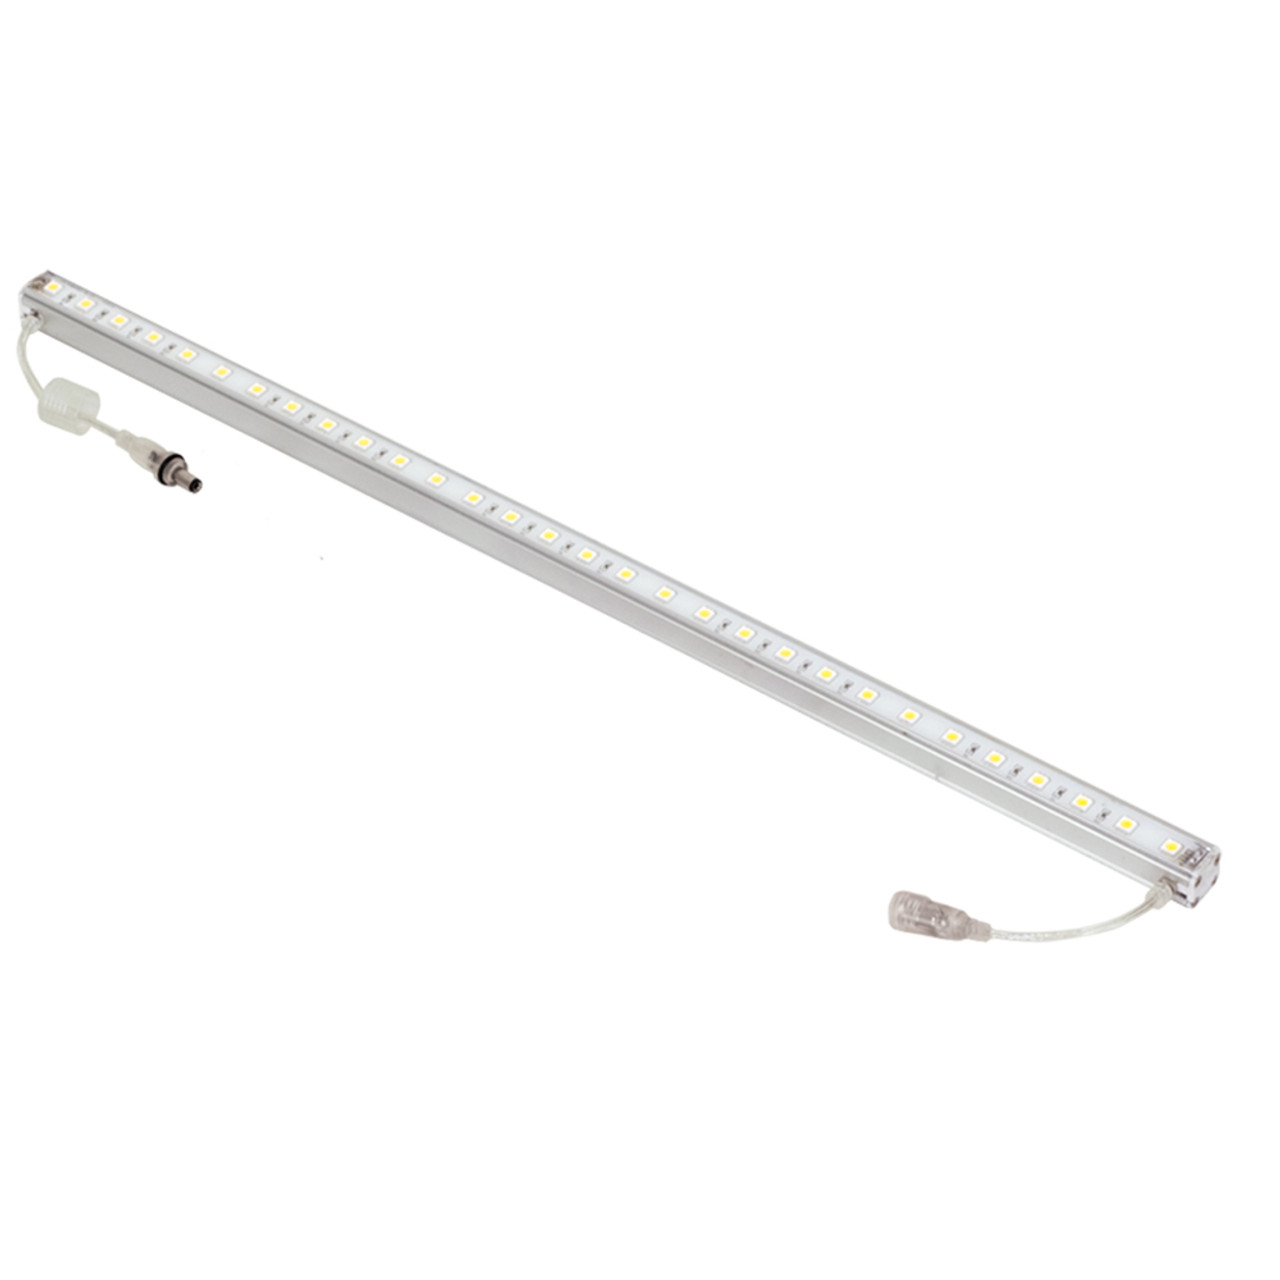 JESCO Lighting DL-RS-24-Y 7.6W Dimmable linear LED fixture for wet,damp and dry locations. Aluminium extruded housing. , Yellow